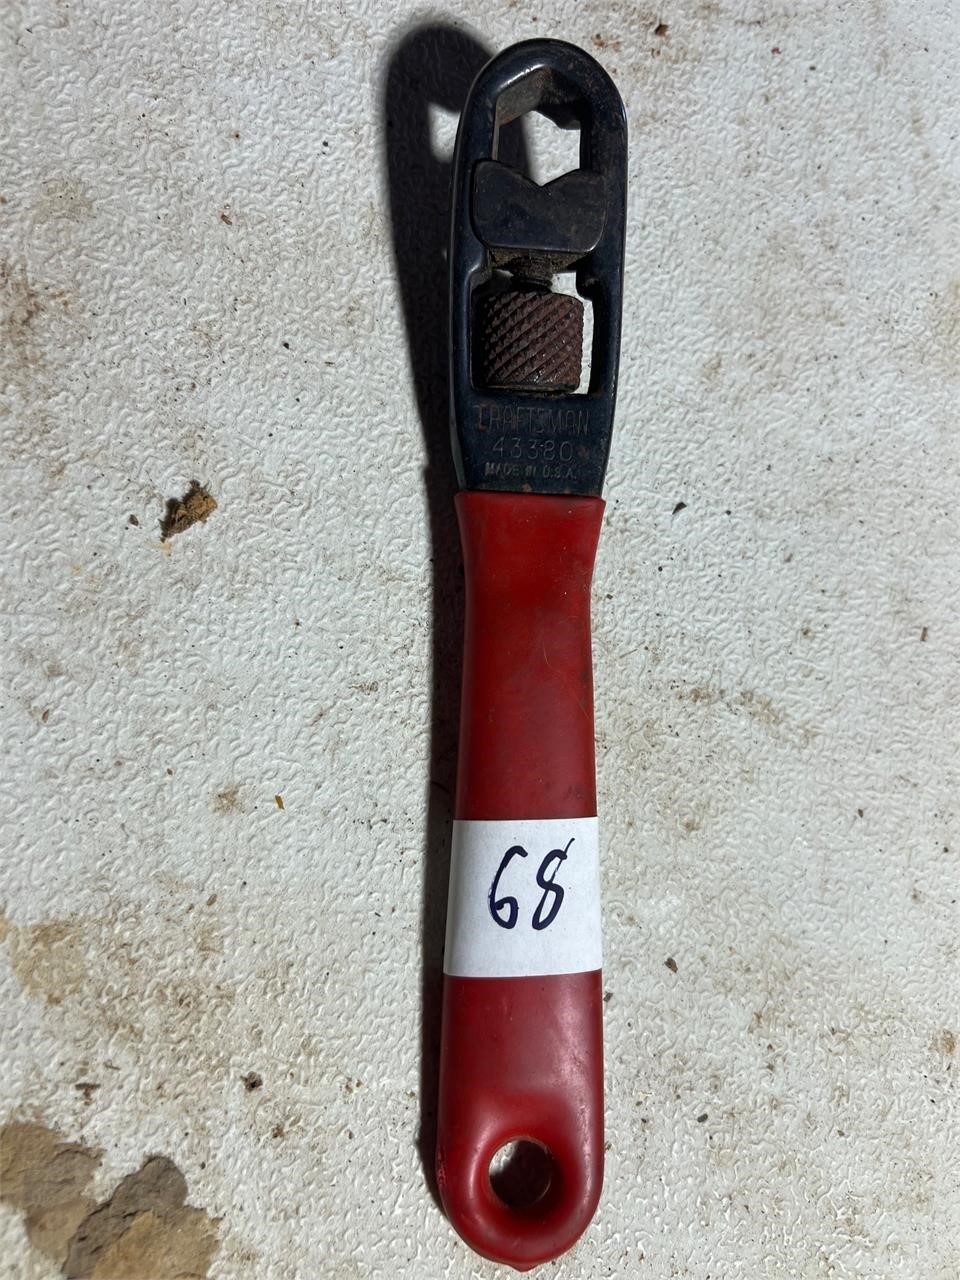 ANTIQUE & TOOL AUCTION IN EMORY, TX